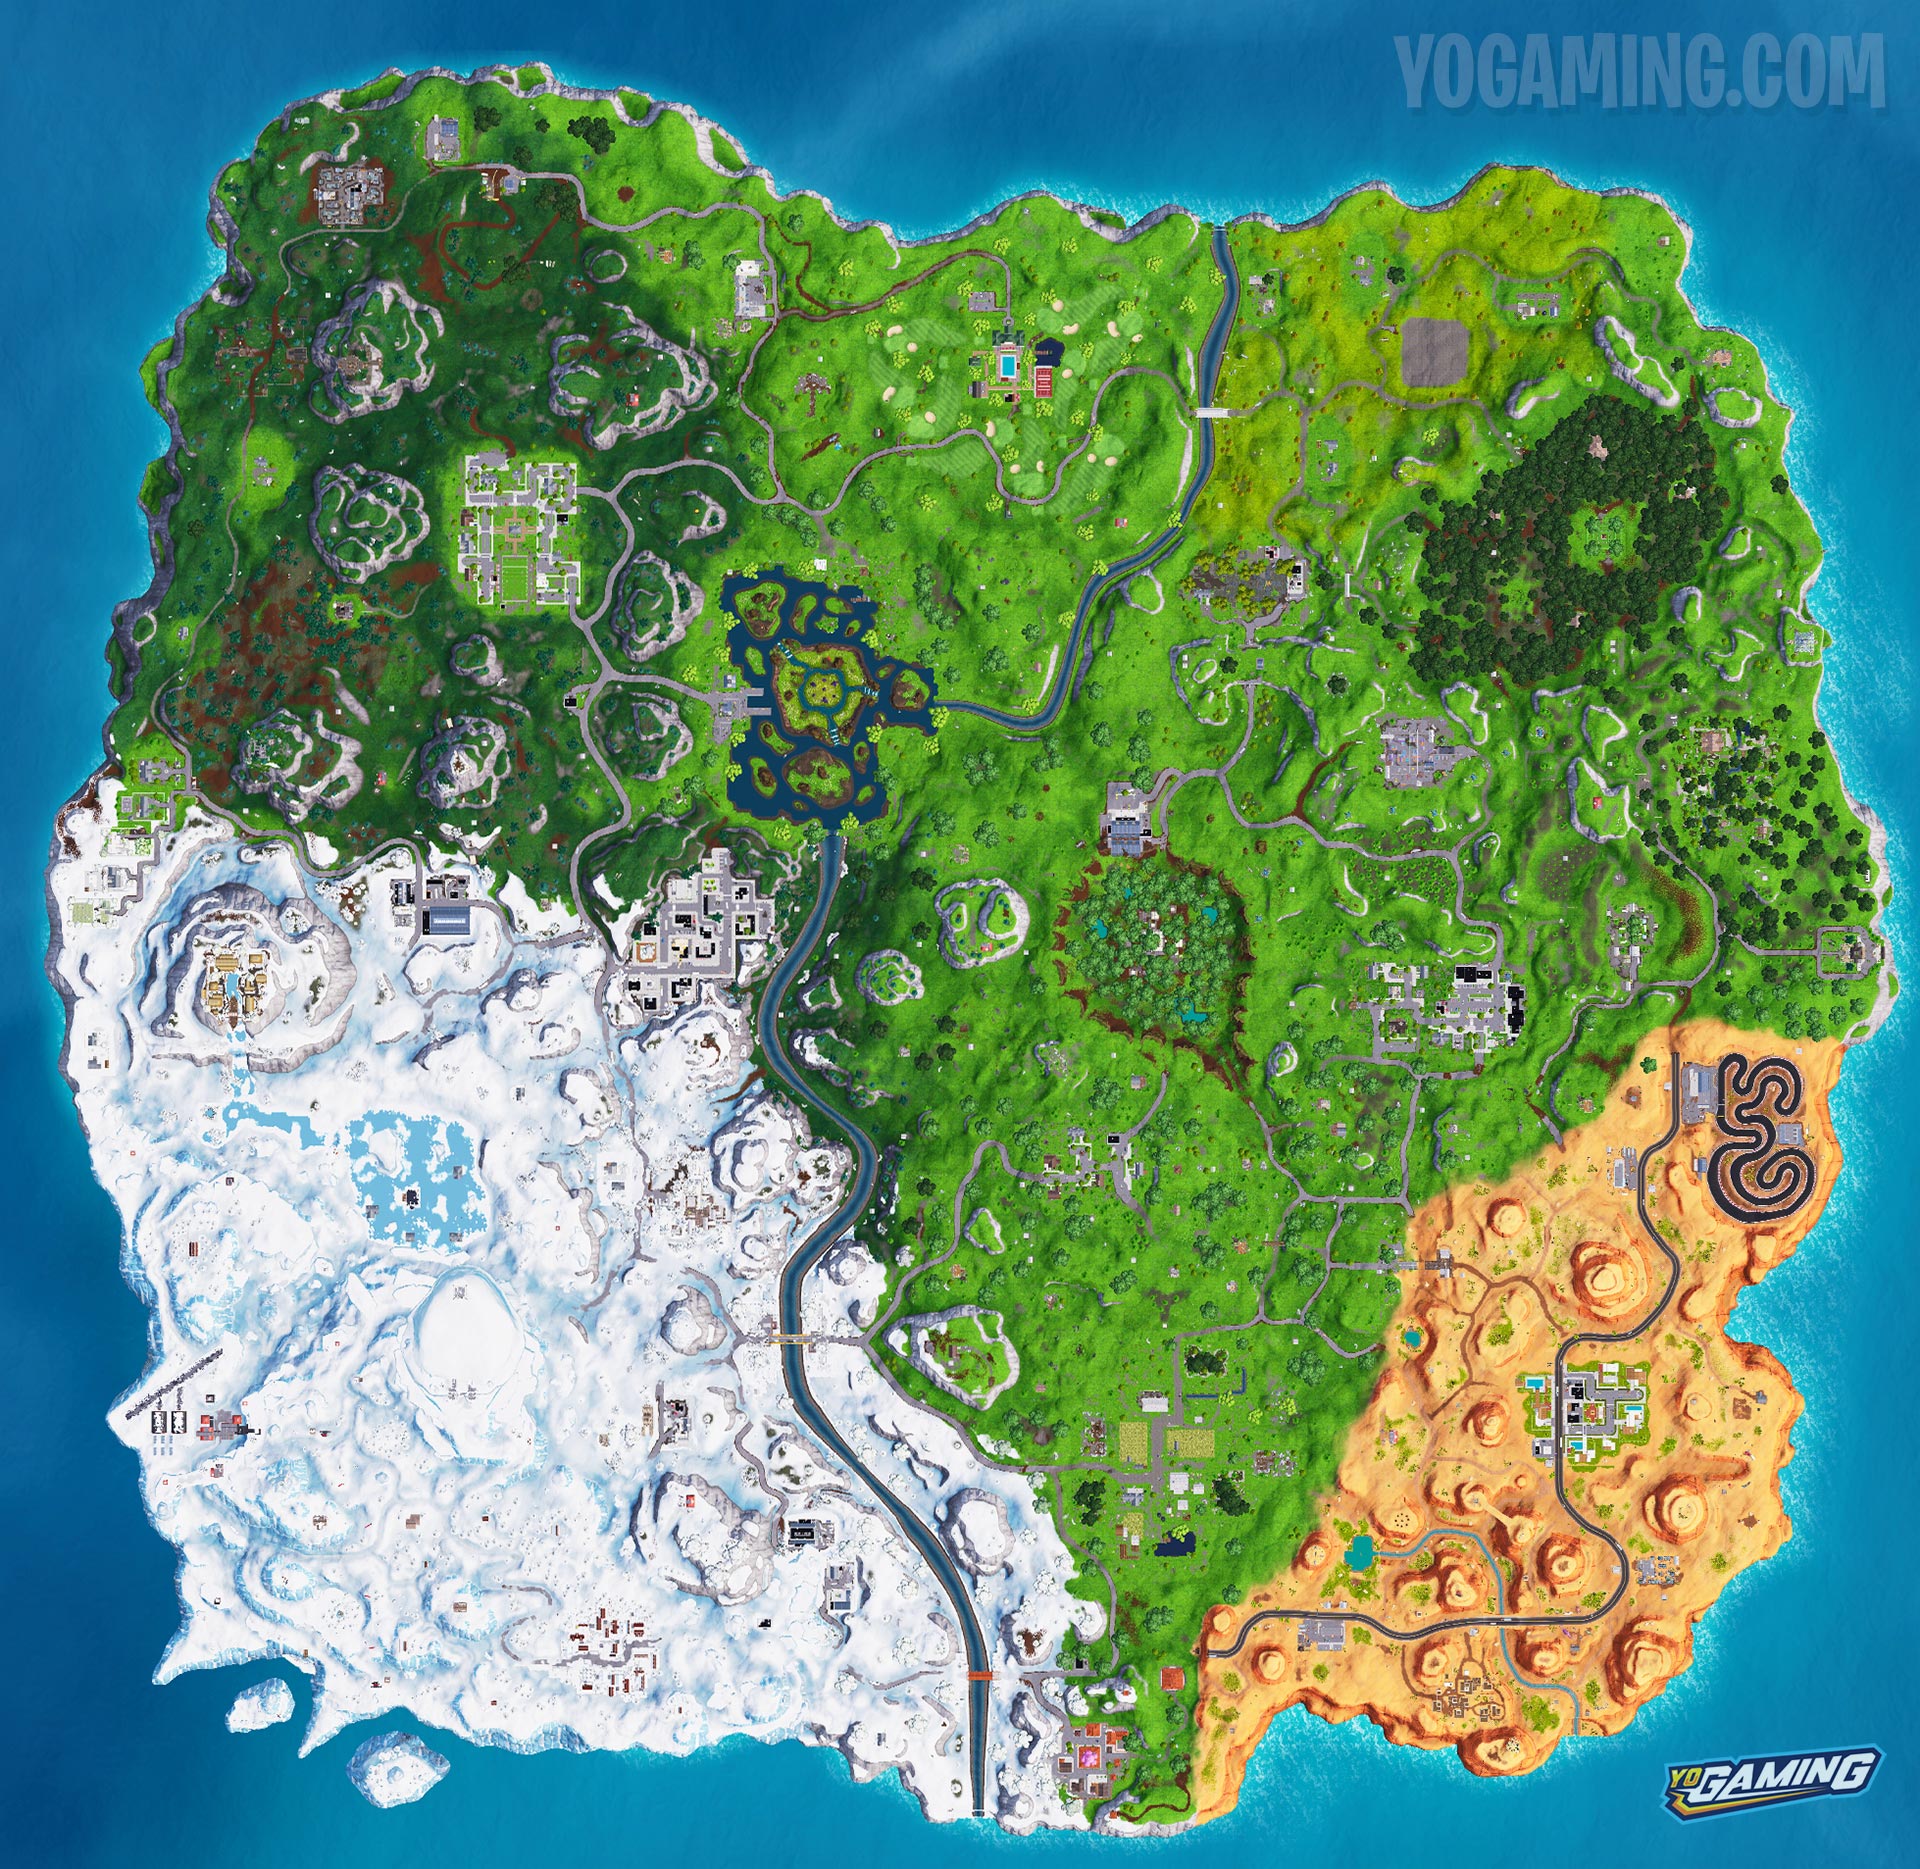 Fortnite Season X Map Without Names Fortnite Battle Royale Map Evolution All Seasons And Patches High Res